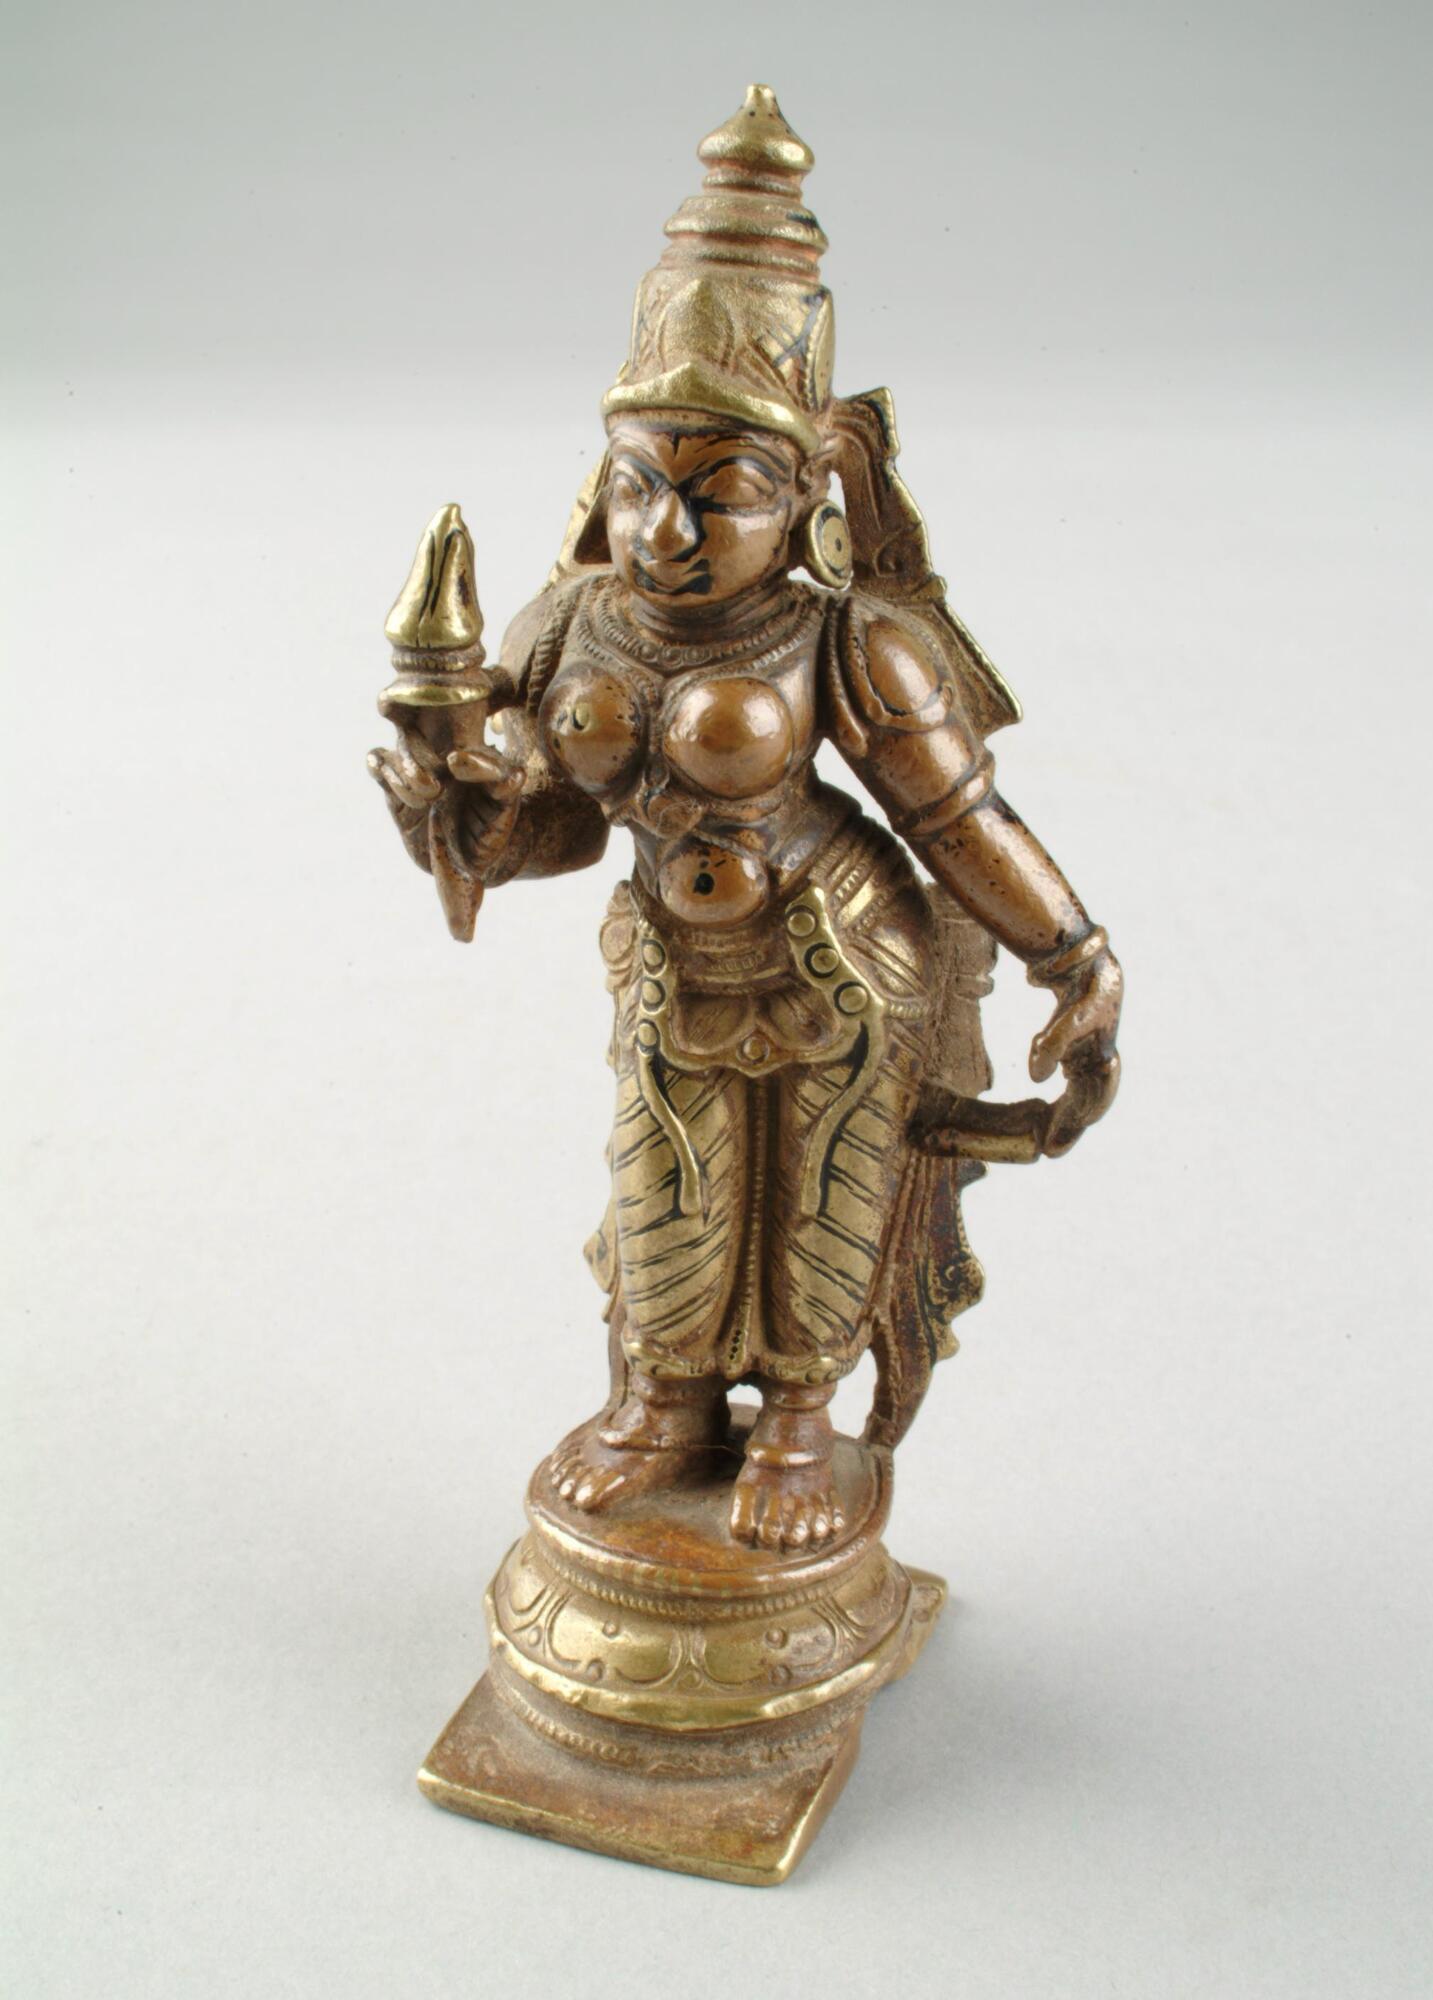 Bhudevi stands in a tribhanga pose (with three bends) with her left arm hanging pendant to her side and holding a lotus bud in her right hand. She leans towards the figure of Vishnu in the grouping of three bronzes.   She stands on a base consisting of a flat square element topped with a series of five round rings.  She wears a decorated lower garment flared out on either side in a pattern.  She wears a decorated belt and necklaces, bracelets and armlets, with shoulder loops, earrings and a crown.  The jewelry and crown is highlighted with gold paint as is his clothing and the two attributes.  She does not wear a band across her breasts, as does Shridevi in groupings with Vishnu and Bhudevi.<br />